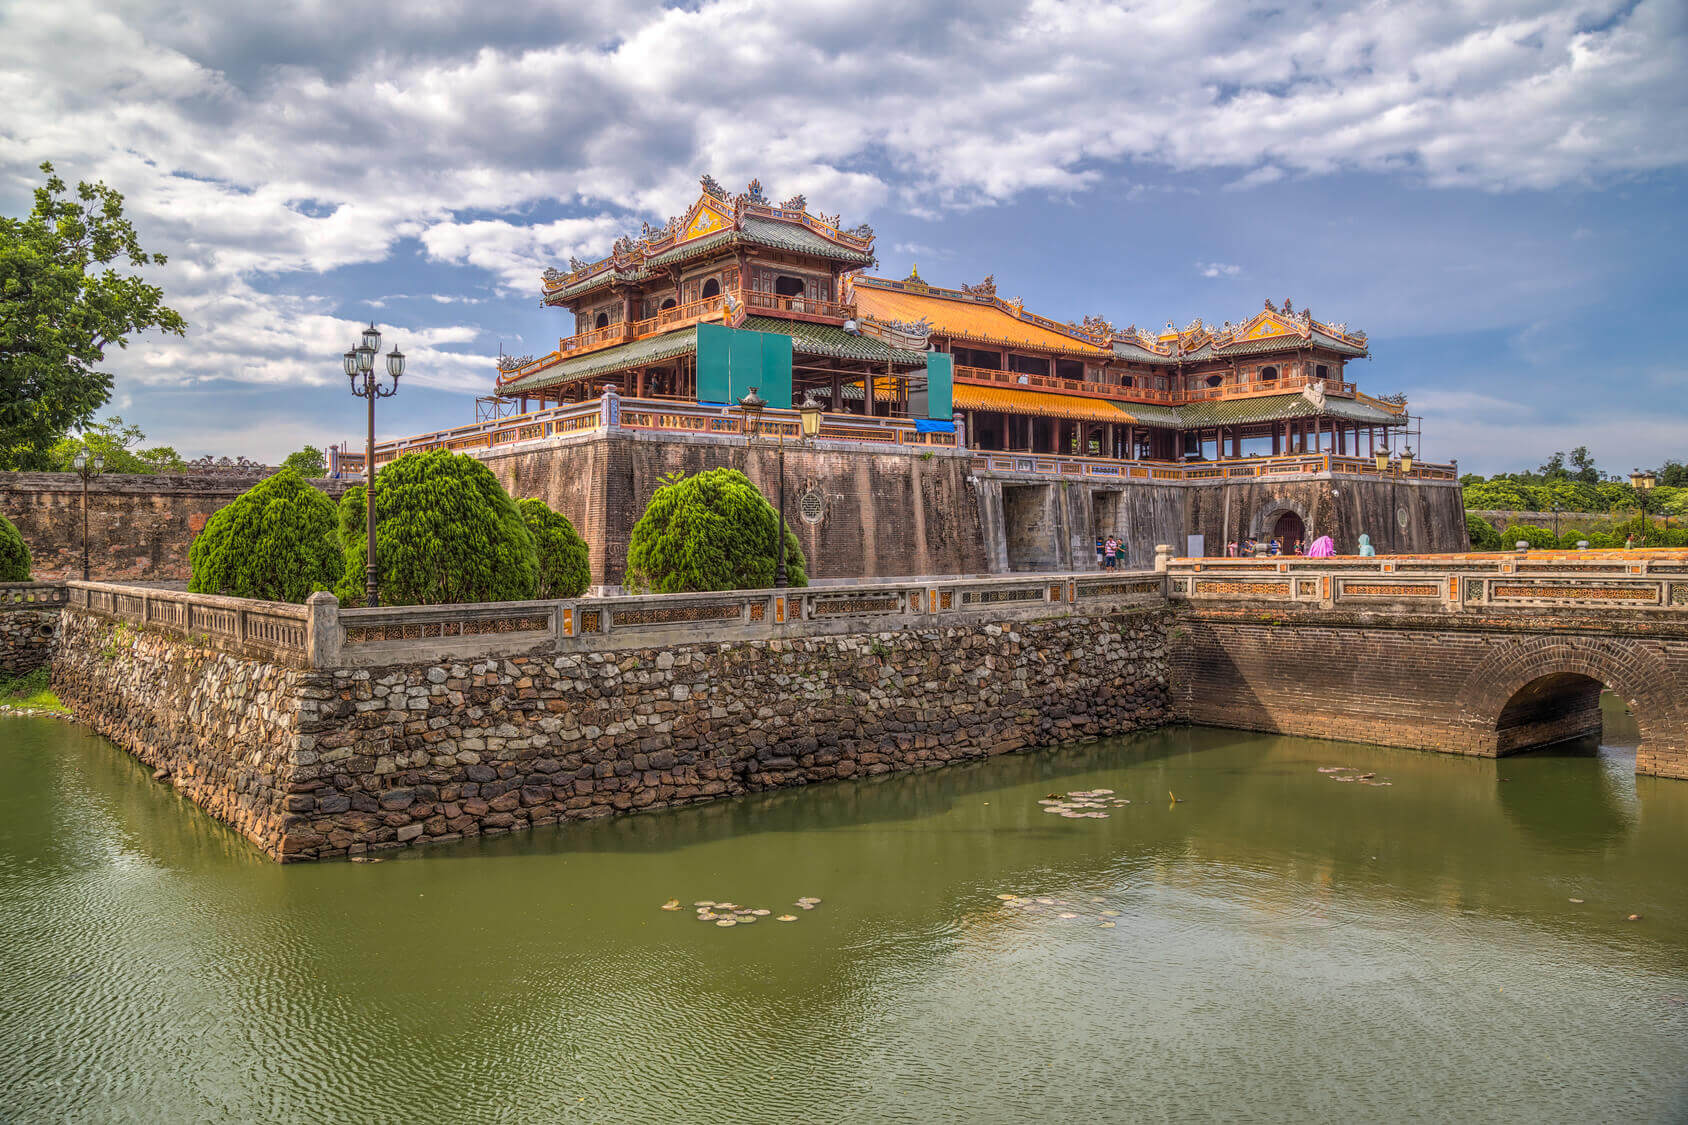 Hue Citadel surrounded by moats - Imperial City Hue